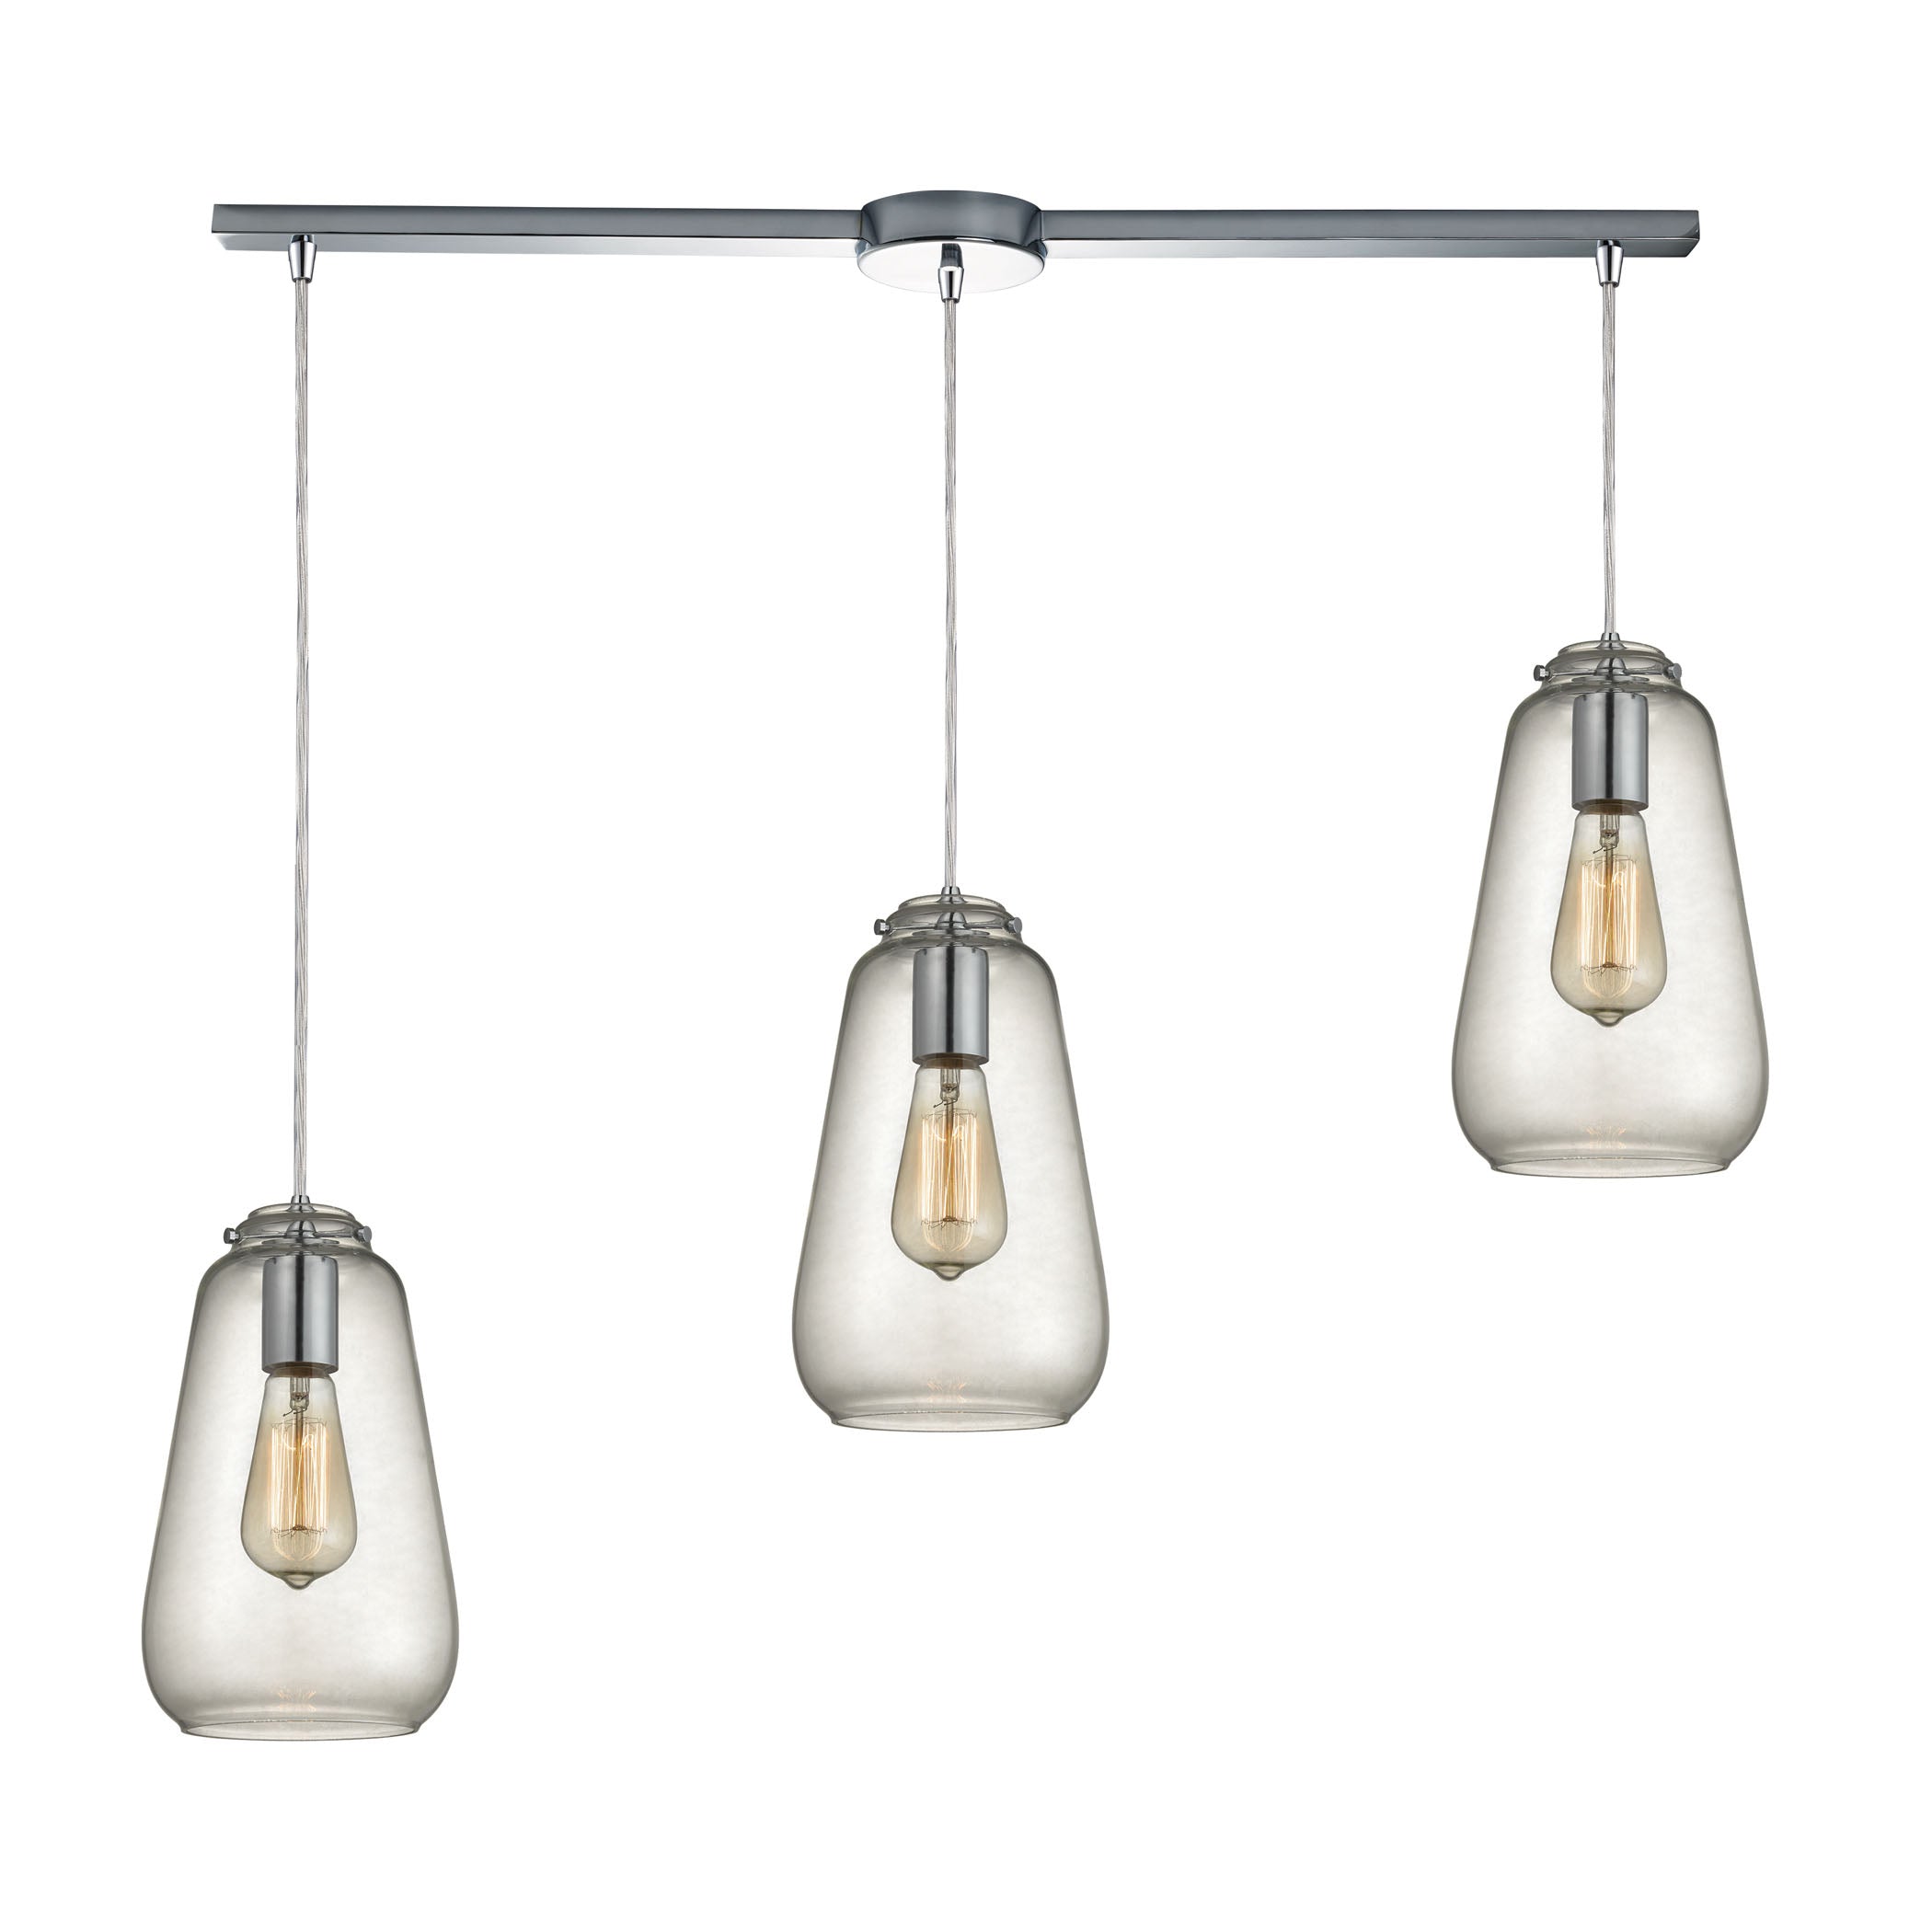 ELK Lighting 10423/3L Orbital 3-Light Linear Pendant Fixture in Polished Chrome with Clear Glass